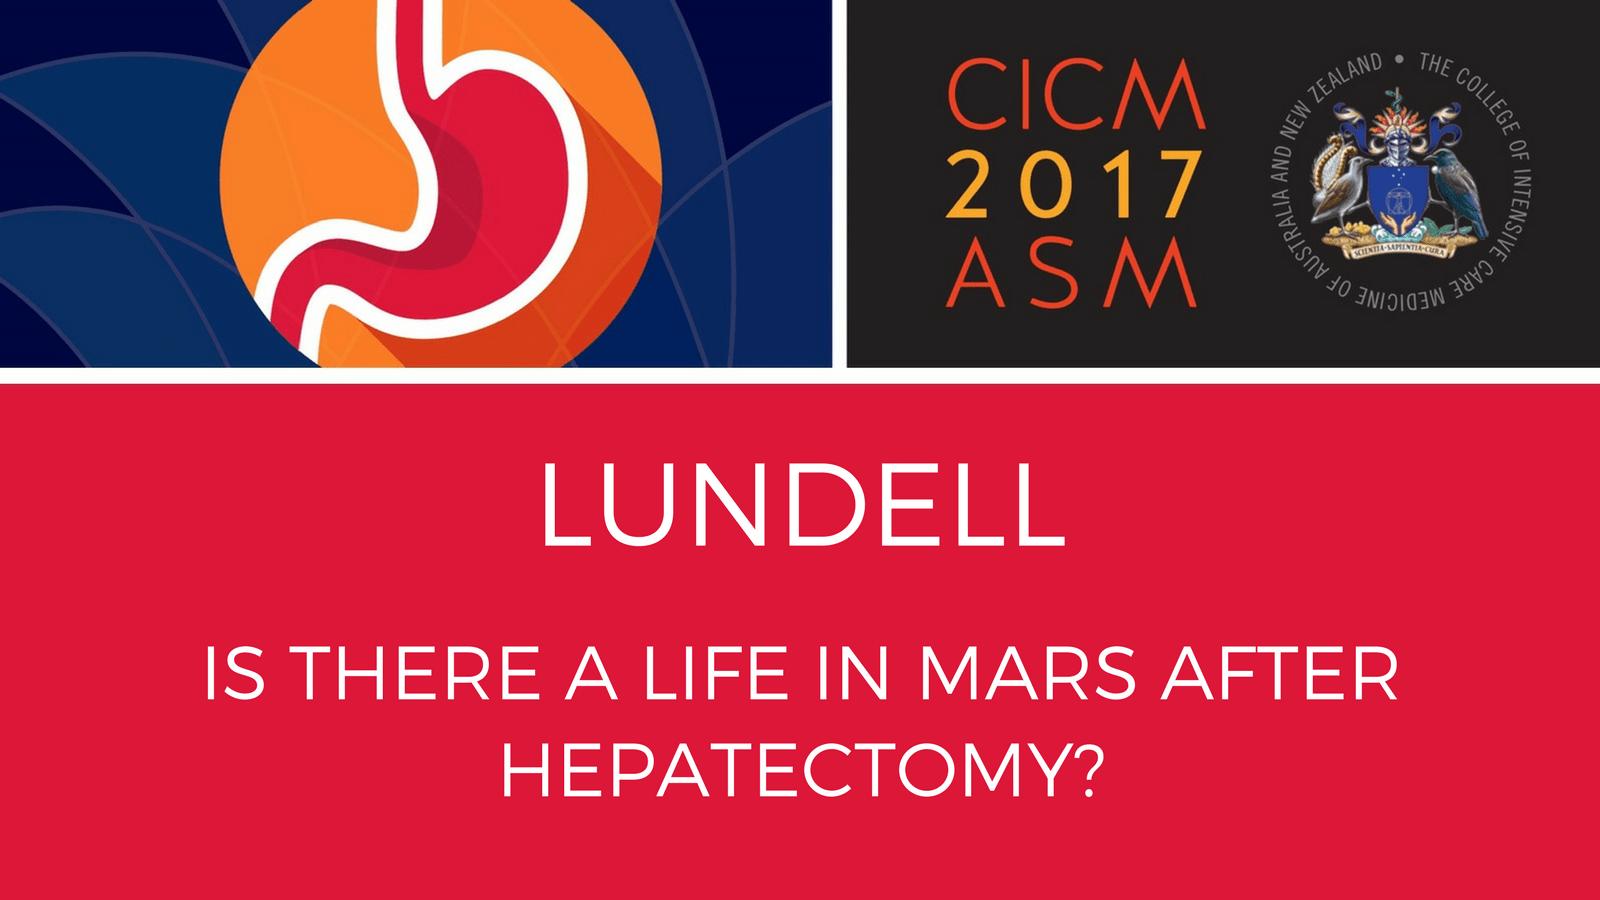 Is there a life in MARS after hepatectomy?